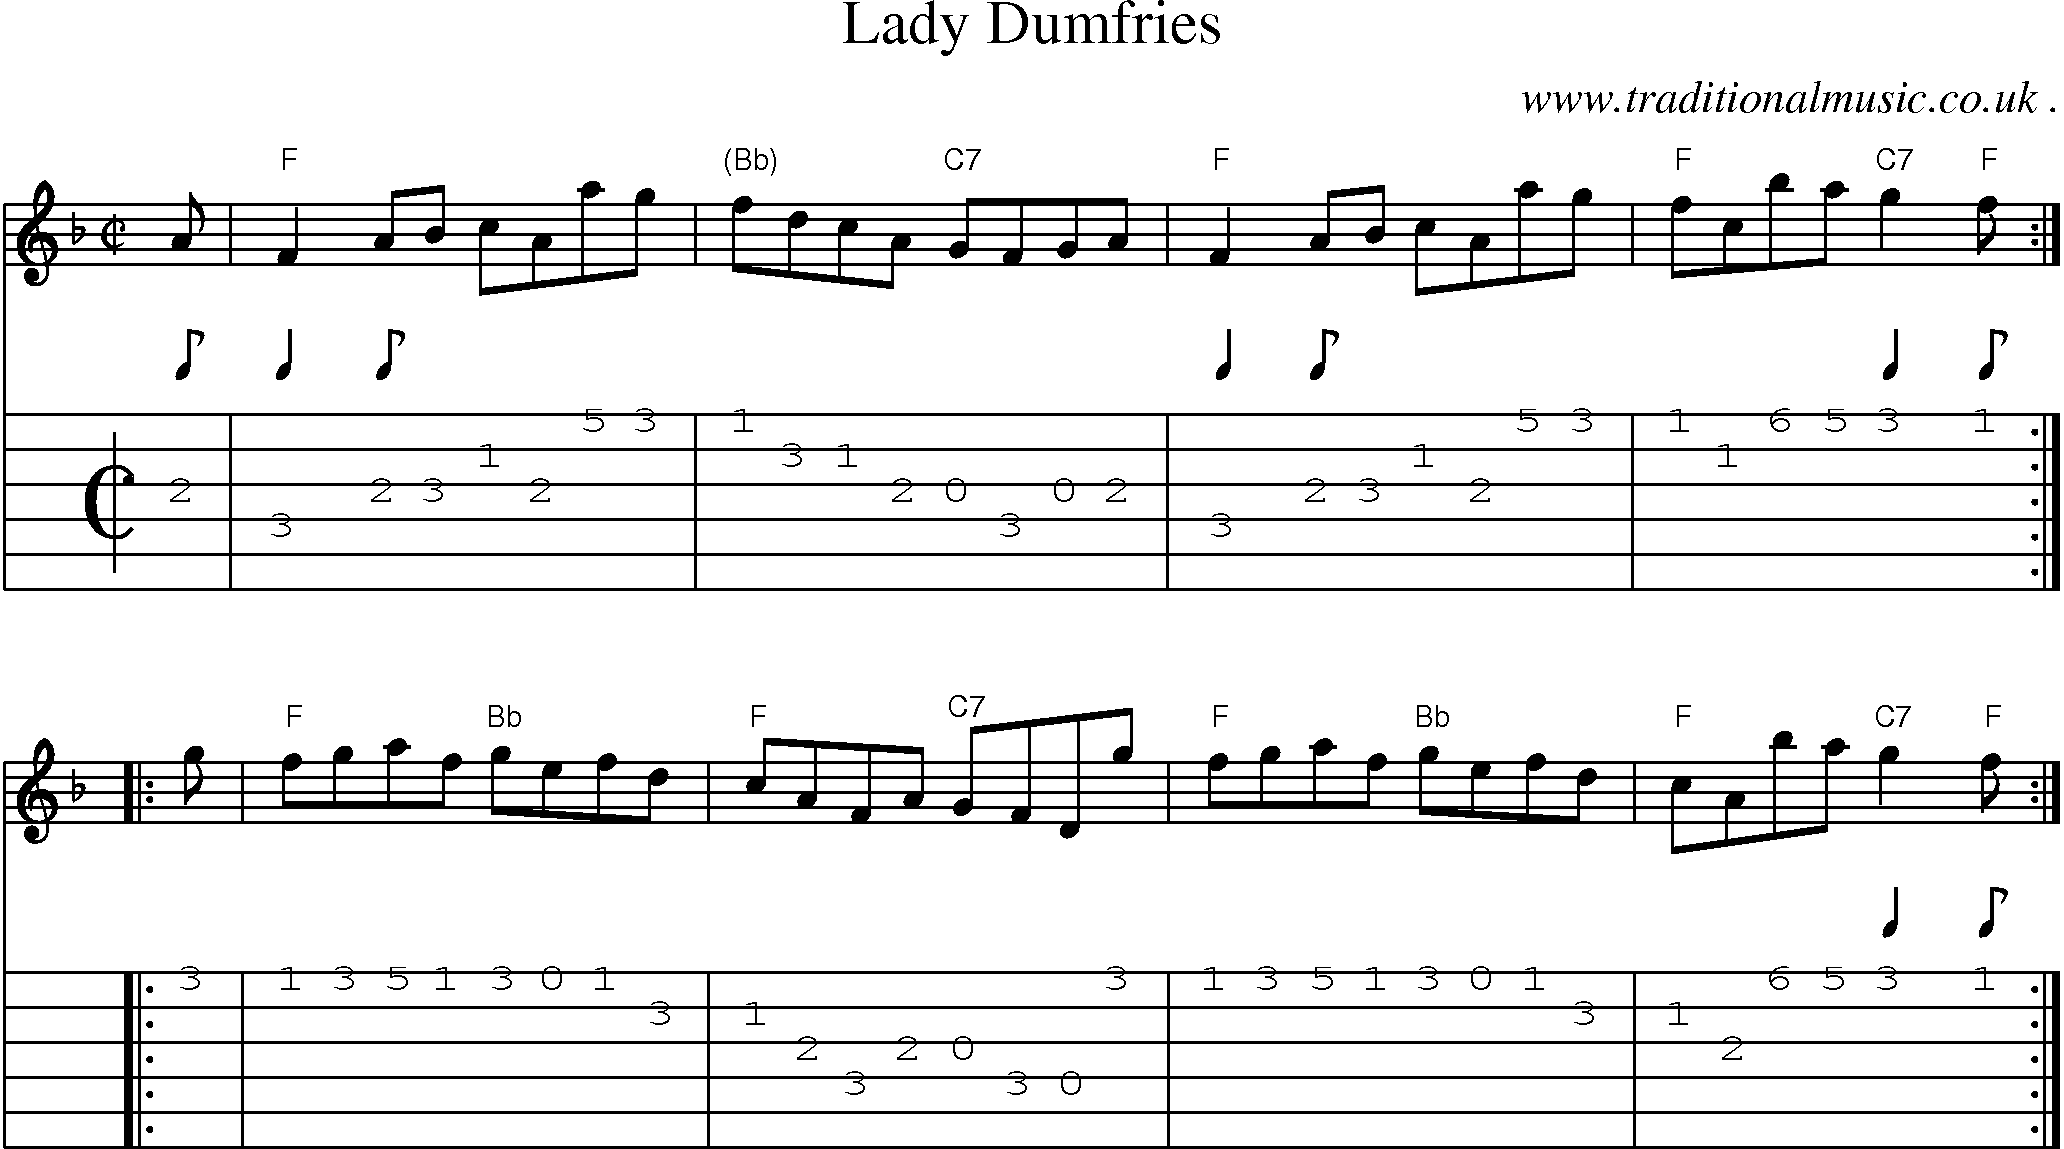 Sheet-music  score, Chords and Guitar Tabs for Lady Dumfries